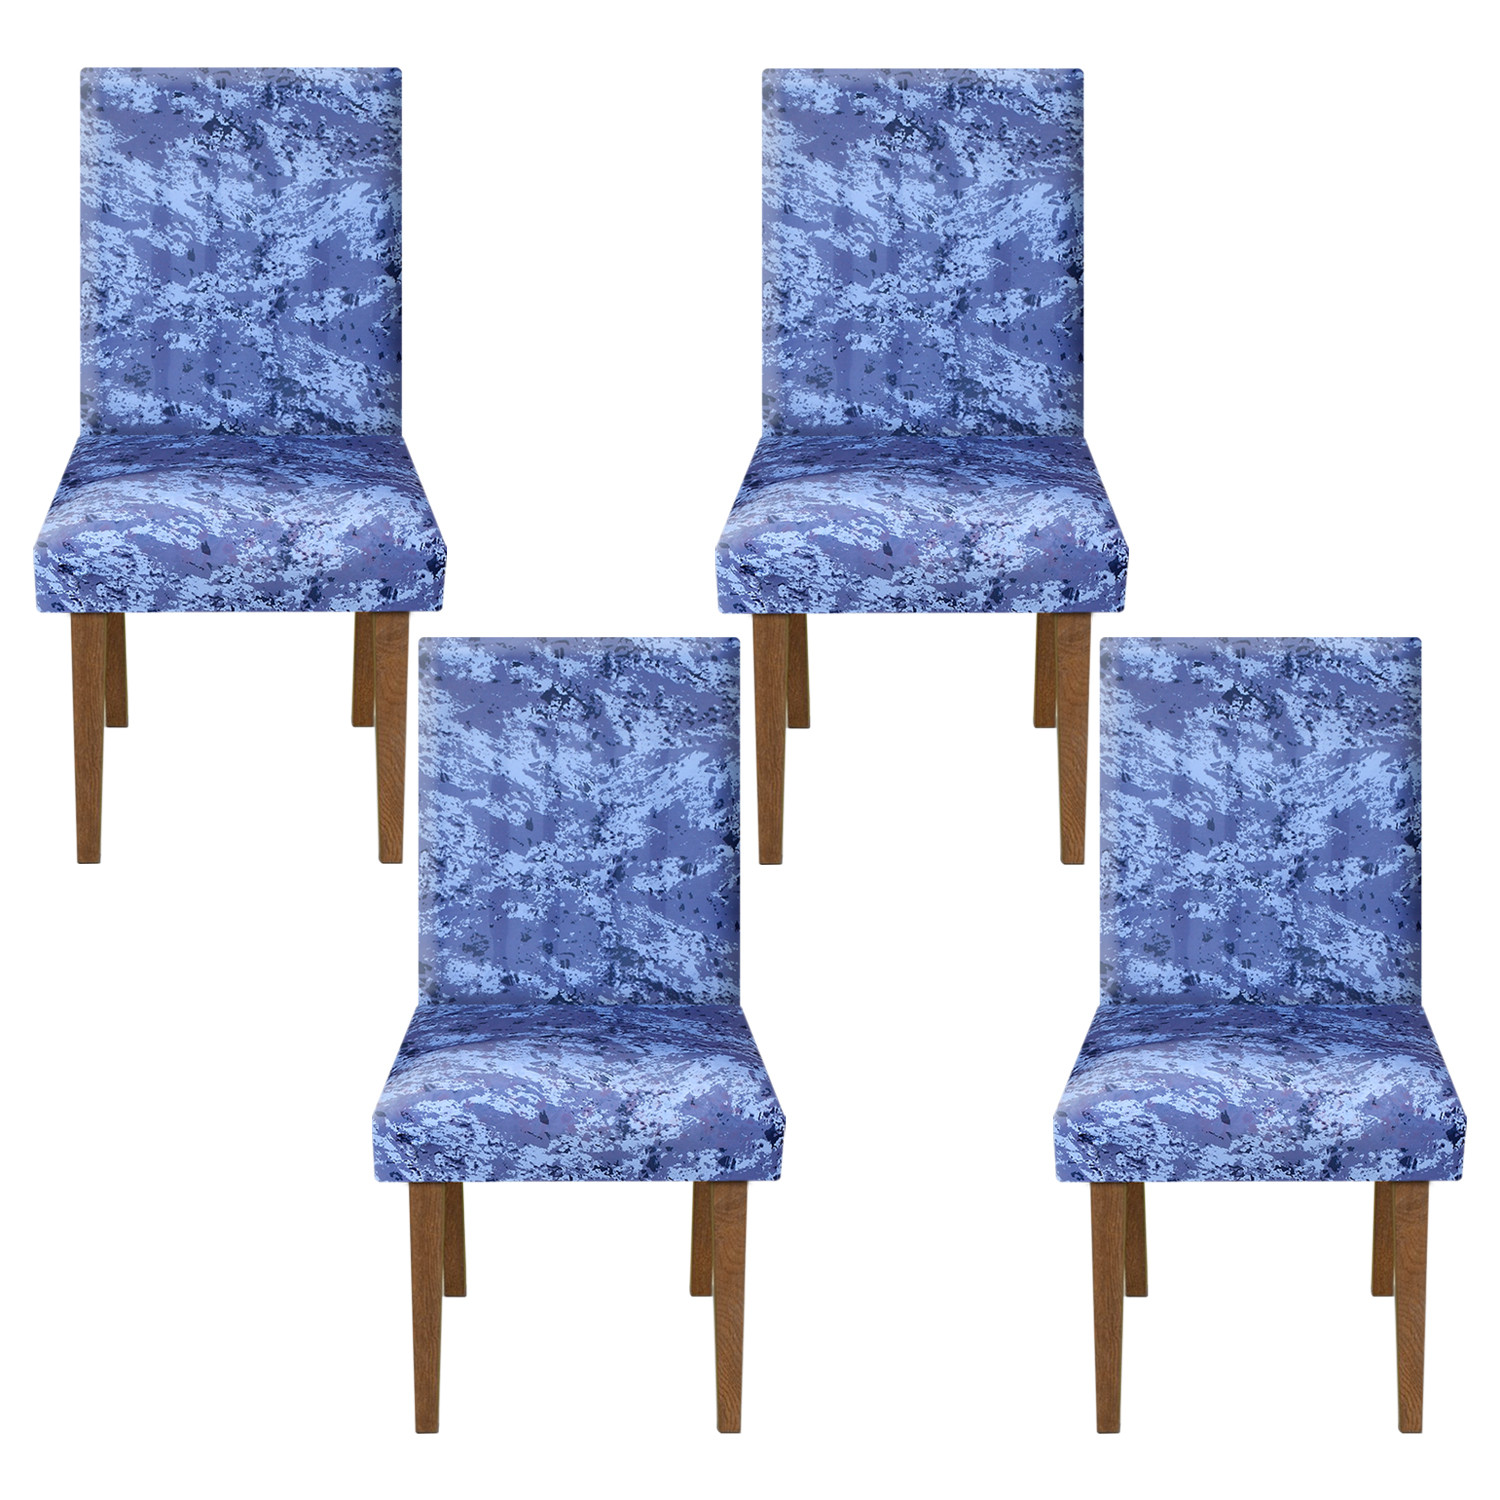 Kuber Industries Camouflage Printed Elastic Stretchable Polyster Chair Cover For Home, Office, Hotels, Wedding Banquet (Blue)